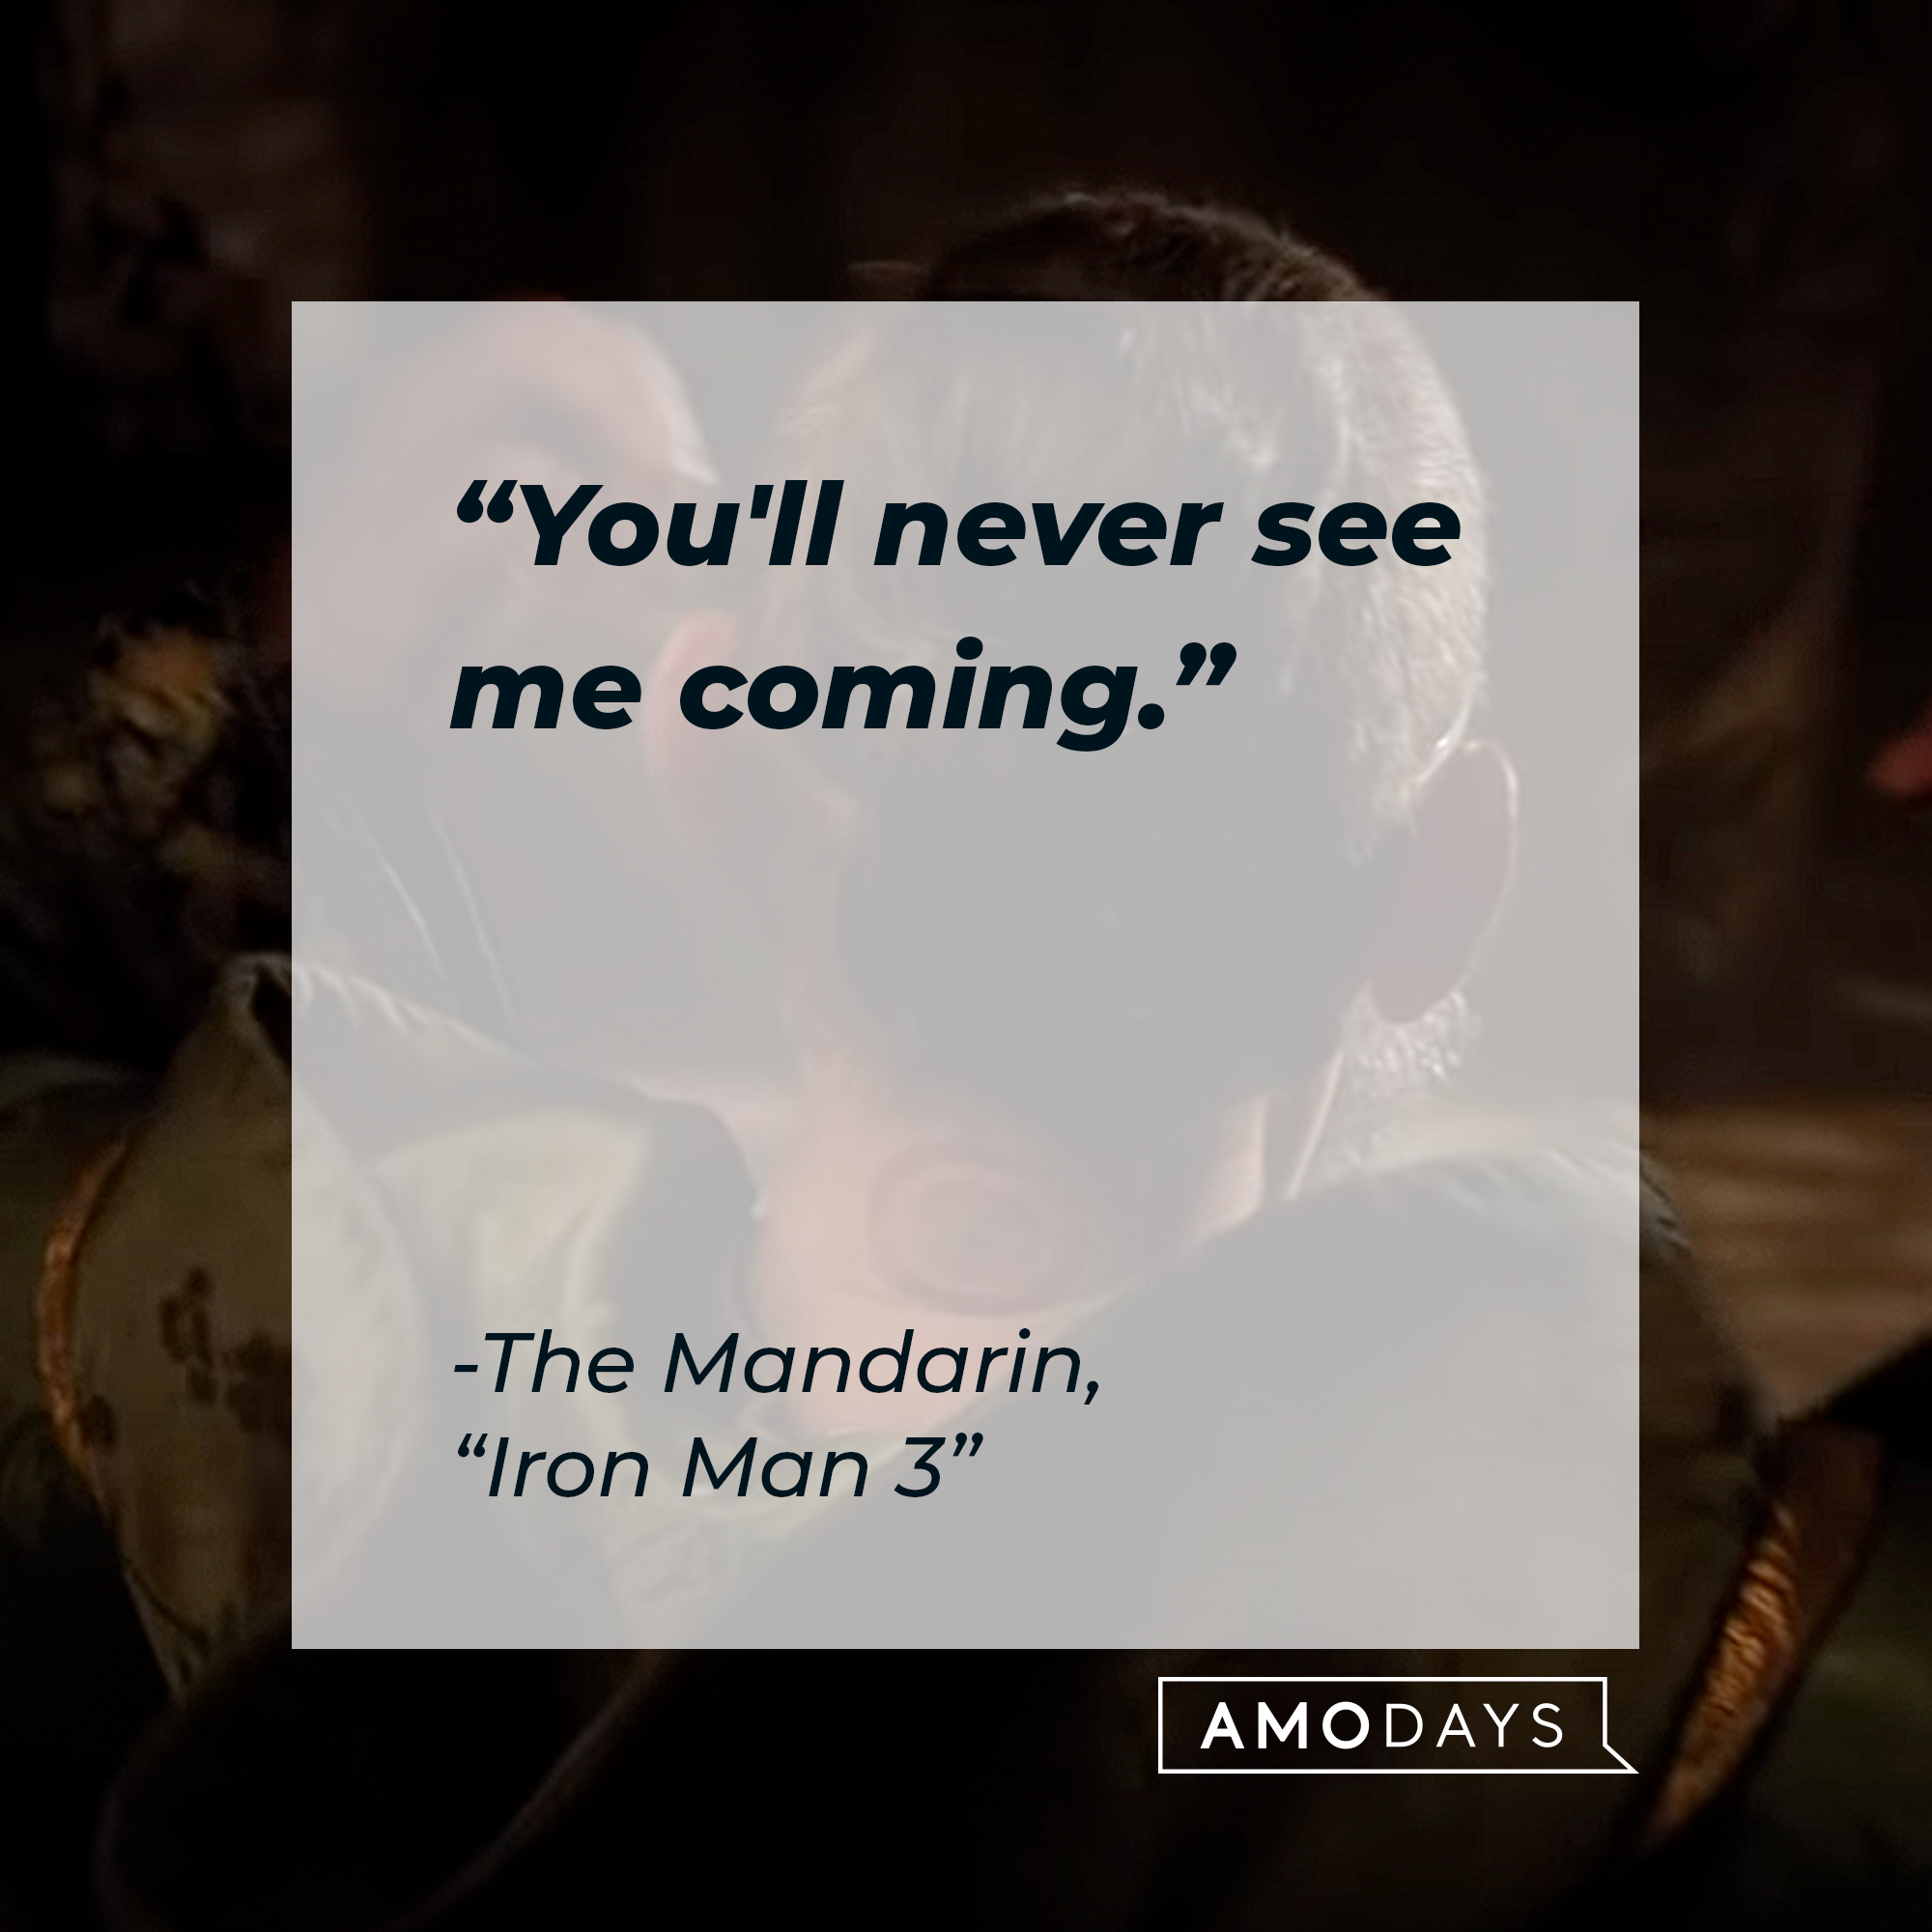 The Mandarin’s quote: "You'll never see me coming." | Image: AmoDays